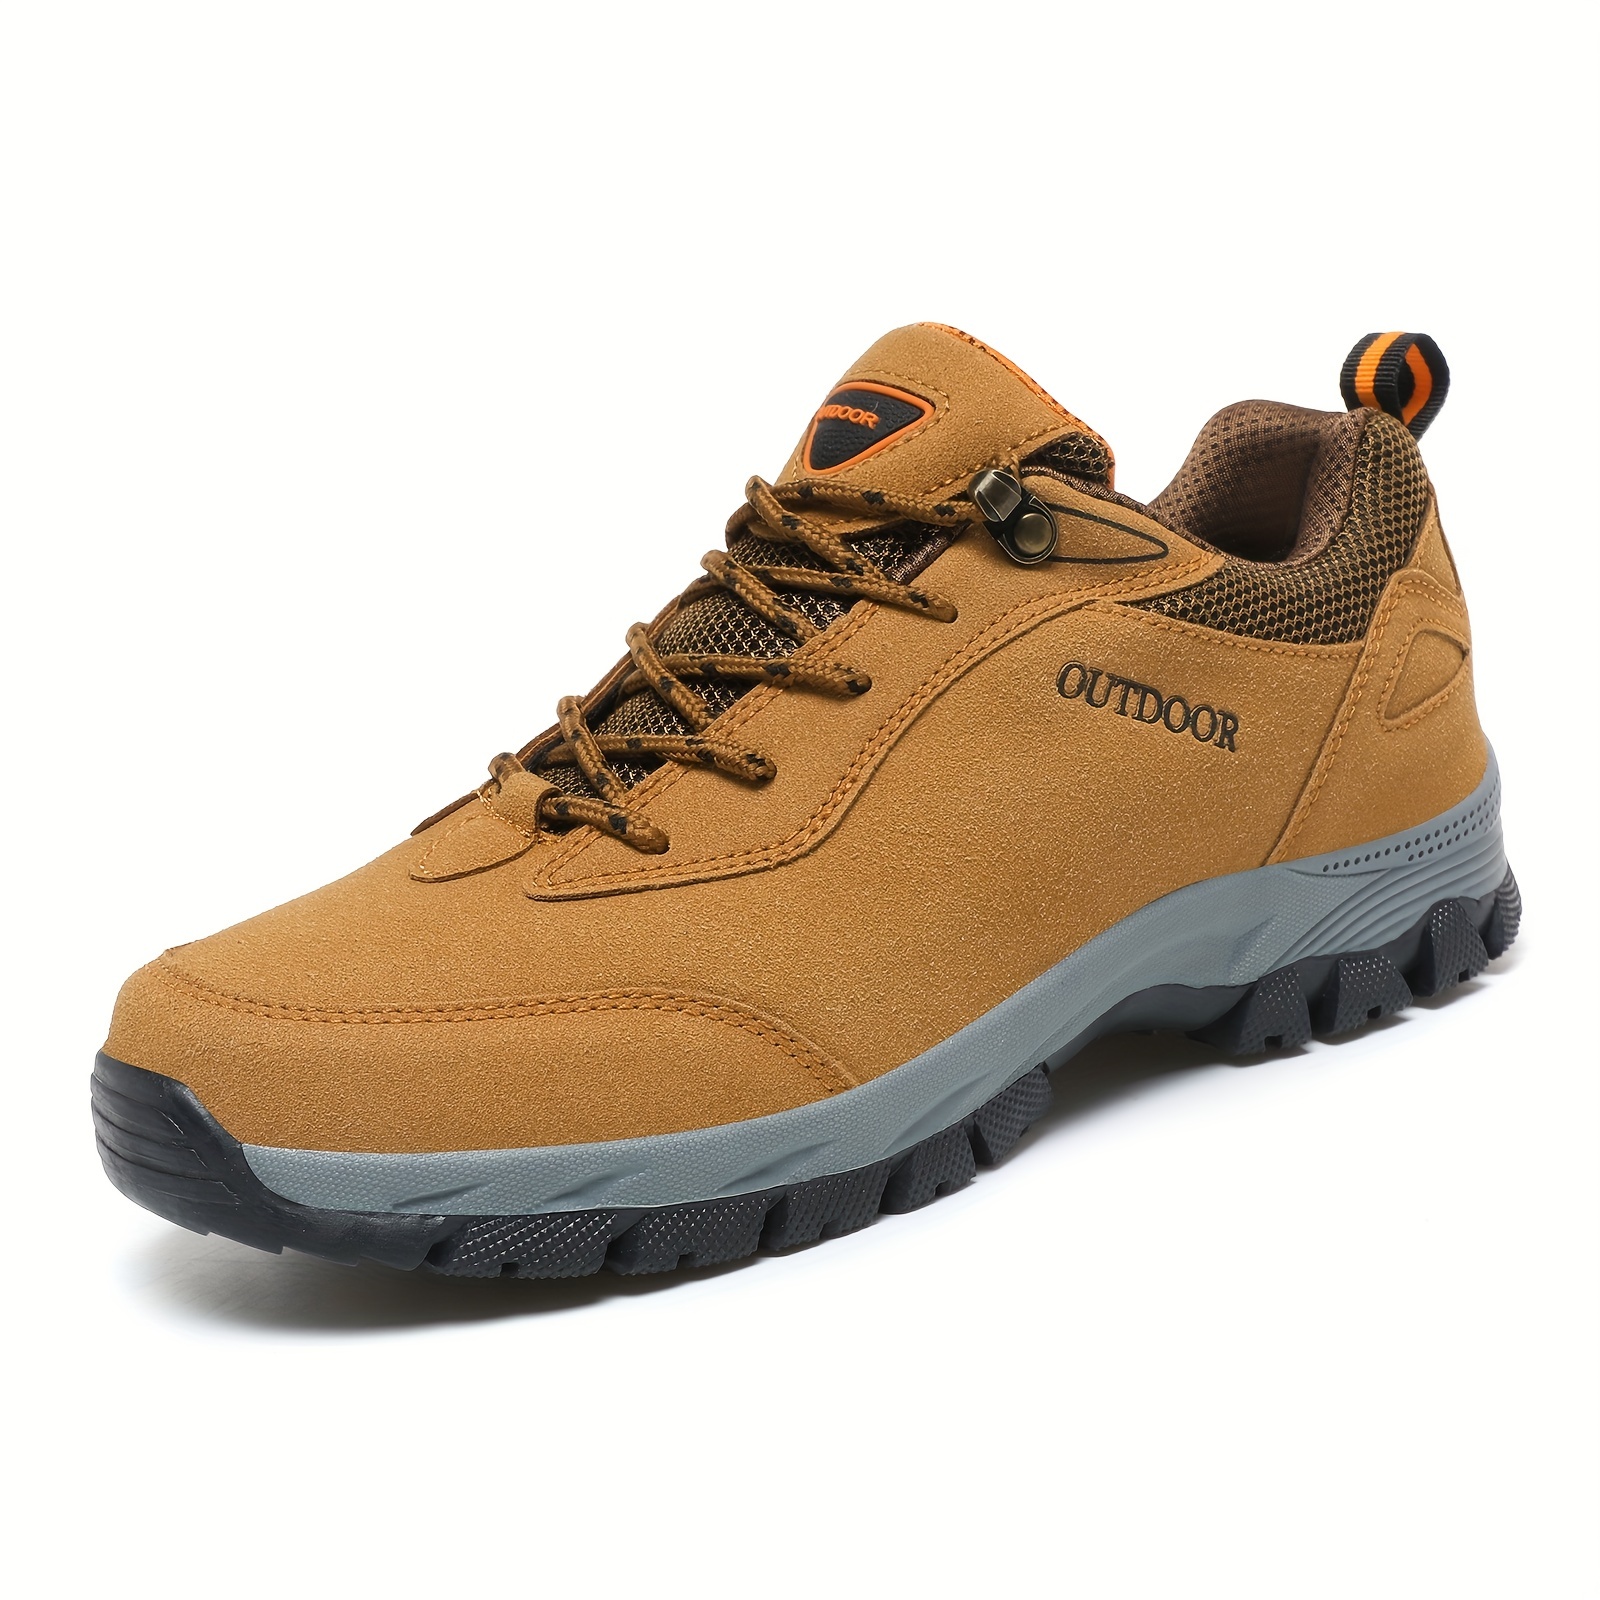 Mens Suede Hiking Shoes Comfortable Non Slip Shock Absorbent Boots